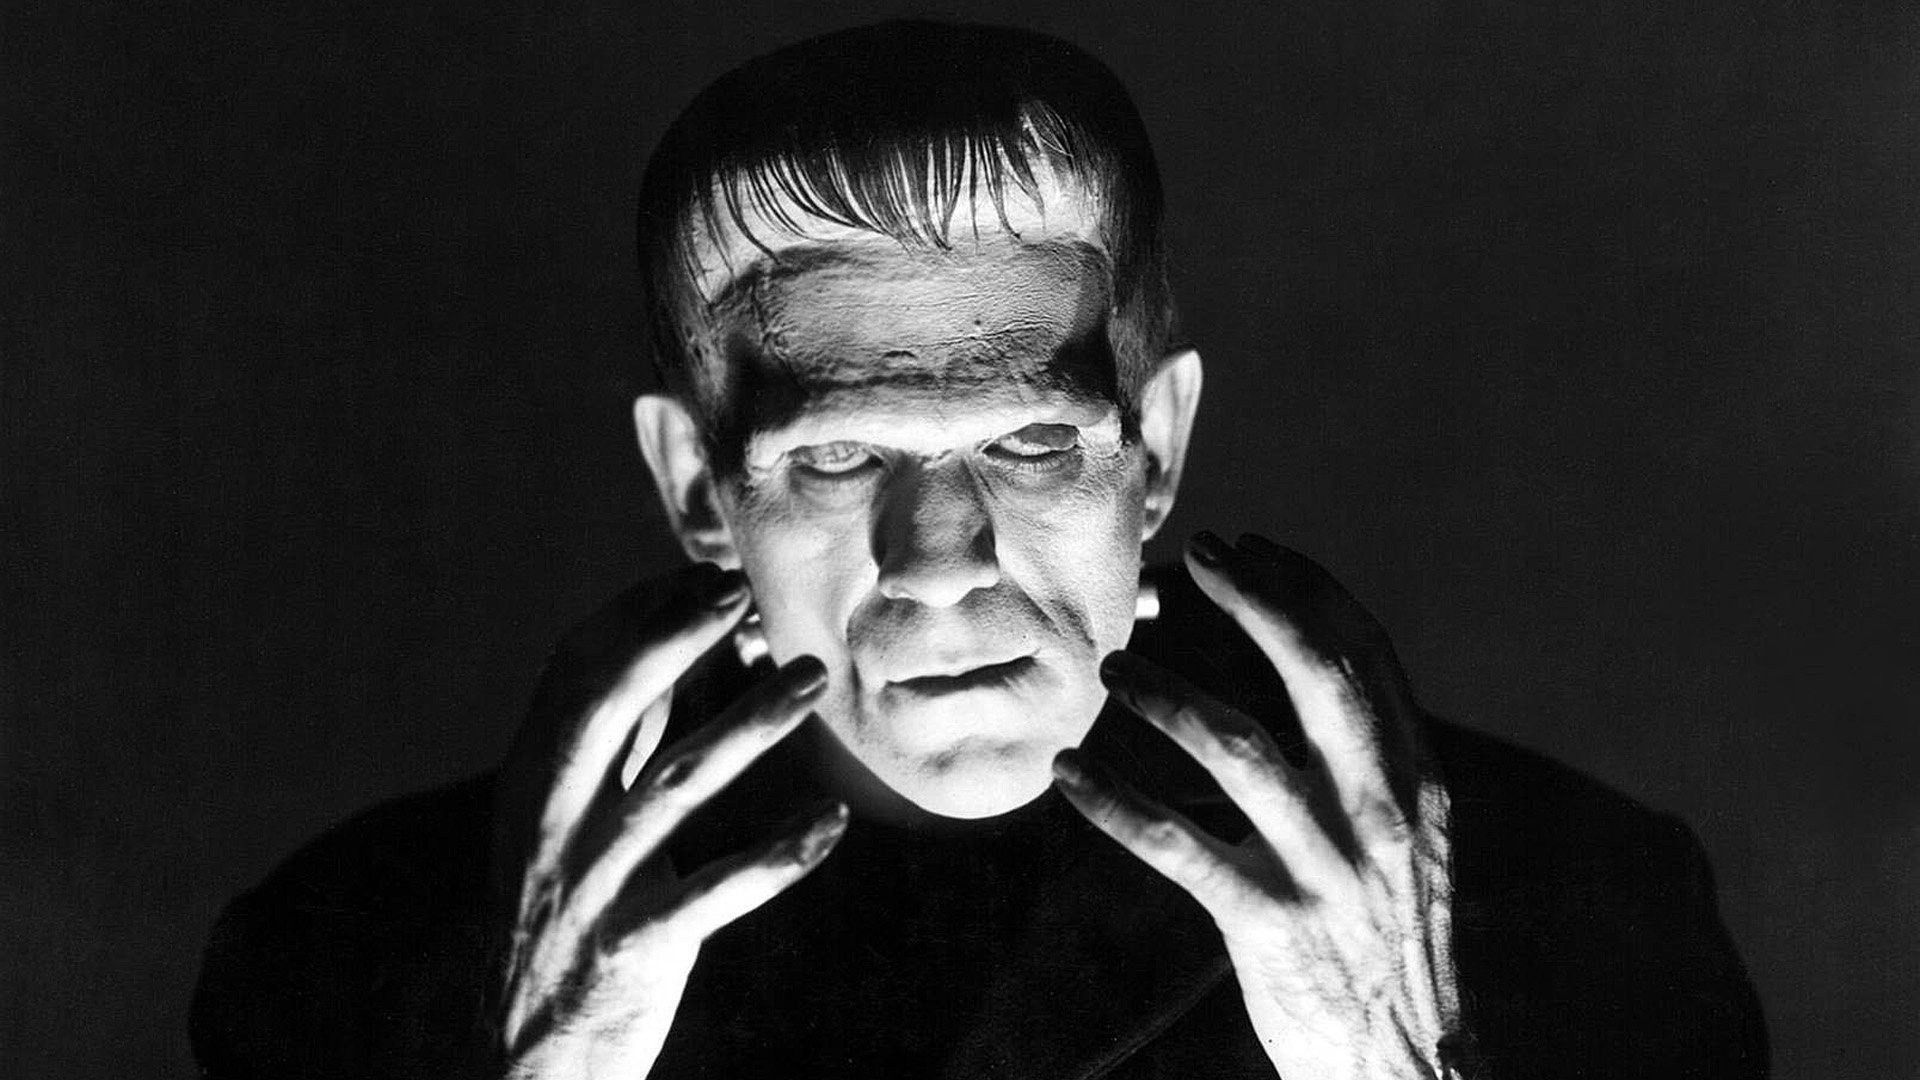 Universal Monsters wallpapers, Vintage horror, Iconic creatures, Cinematic legacy, 1920x1080 Full HD Desktop